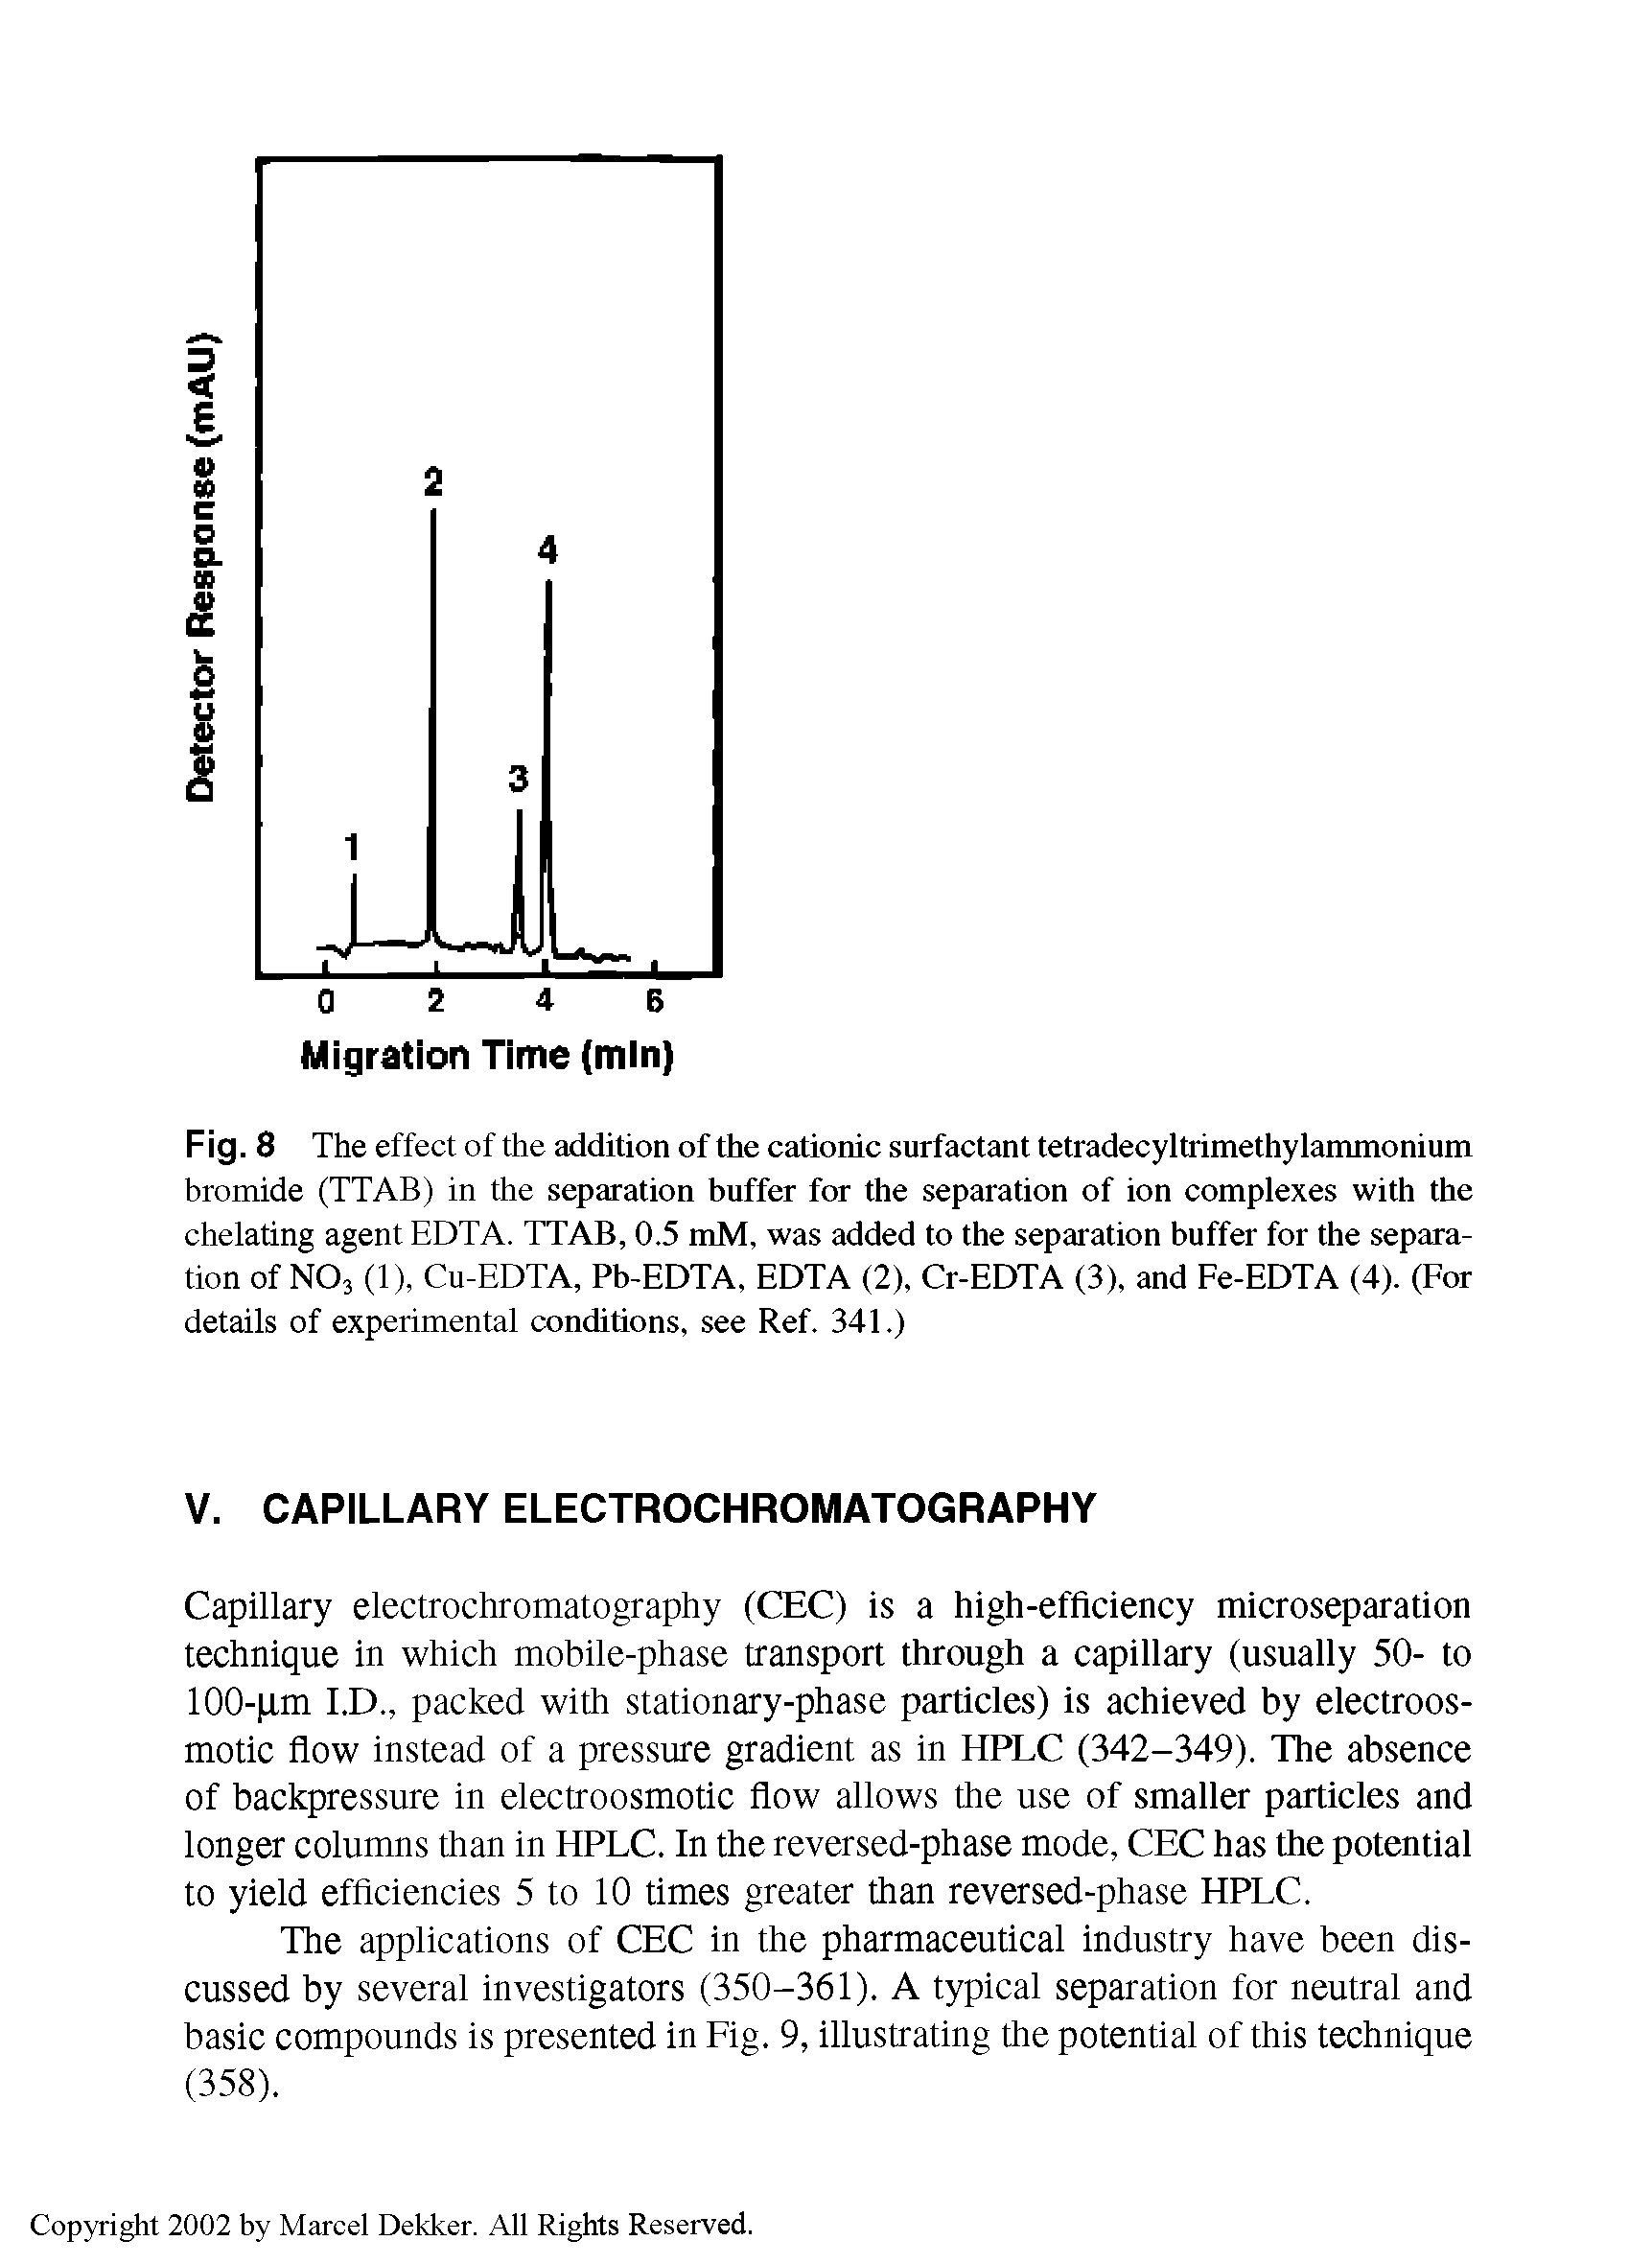 Fig. 8 The effect of the addition of the cationic surfactant tetradecyltrimethylammonium bromide (TTAB) in the separation buffer for the separation of ion complexes with the chelating agent EDTA. TTAB, 0.5 mM, was added to the separation buffer for the separation of N03 (1), Cu-EDTA, Pb-EDTA, EDTA (2), Cr-EDTA (3), and Fe-EDTA (4). (For details of experimental conditions, see Ref. 341.)...